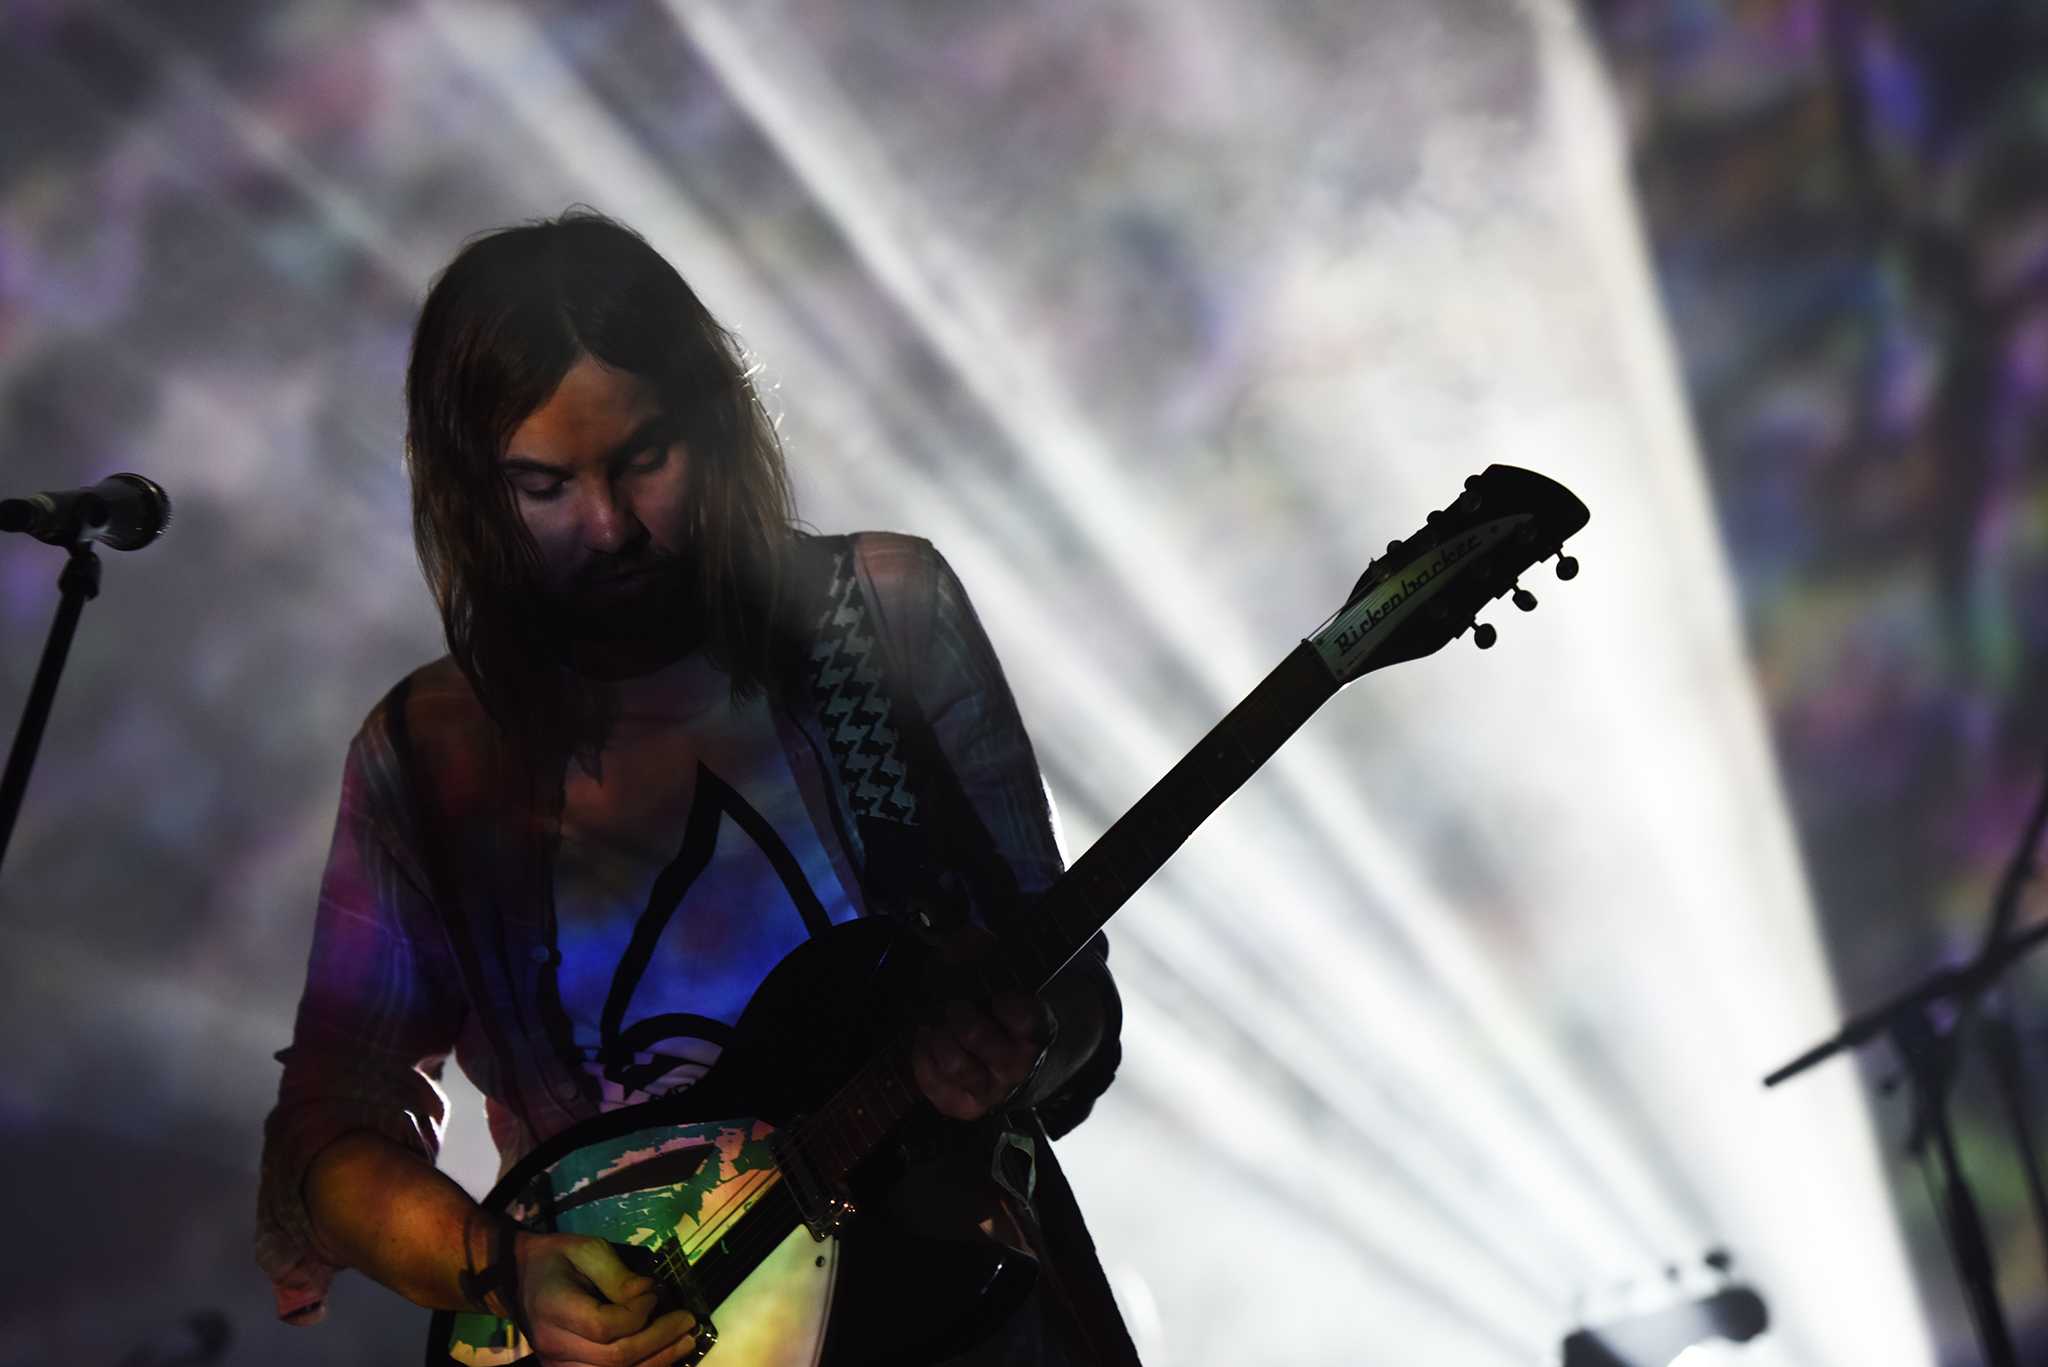 Tame Impala at Main Stage by Everett Fitzpatrick for FYF Fest